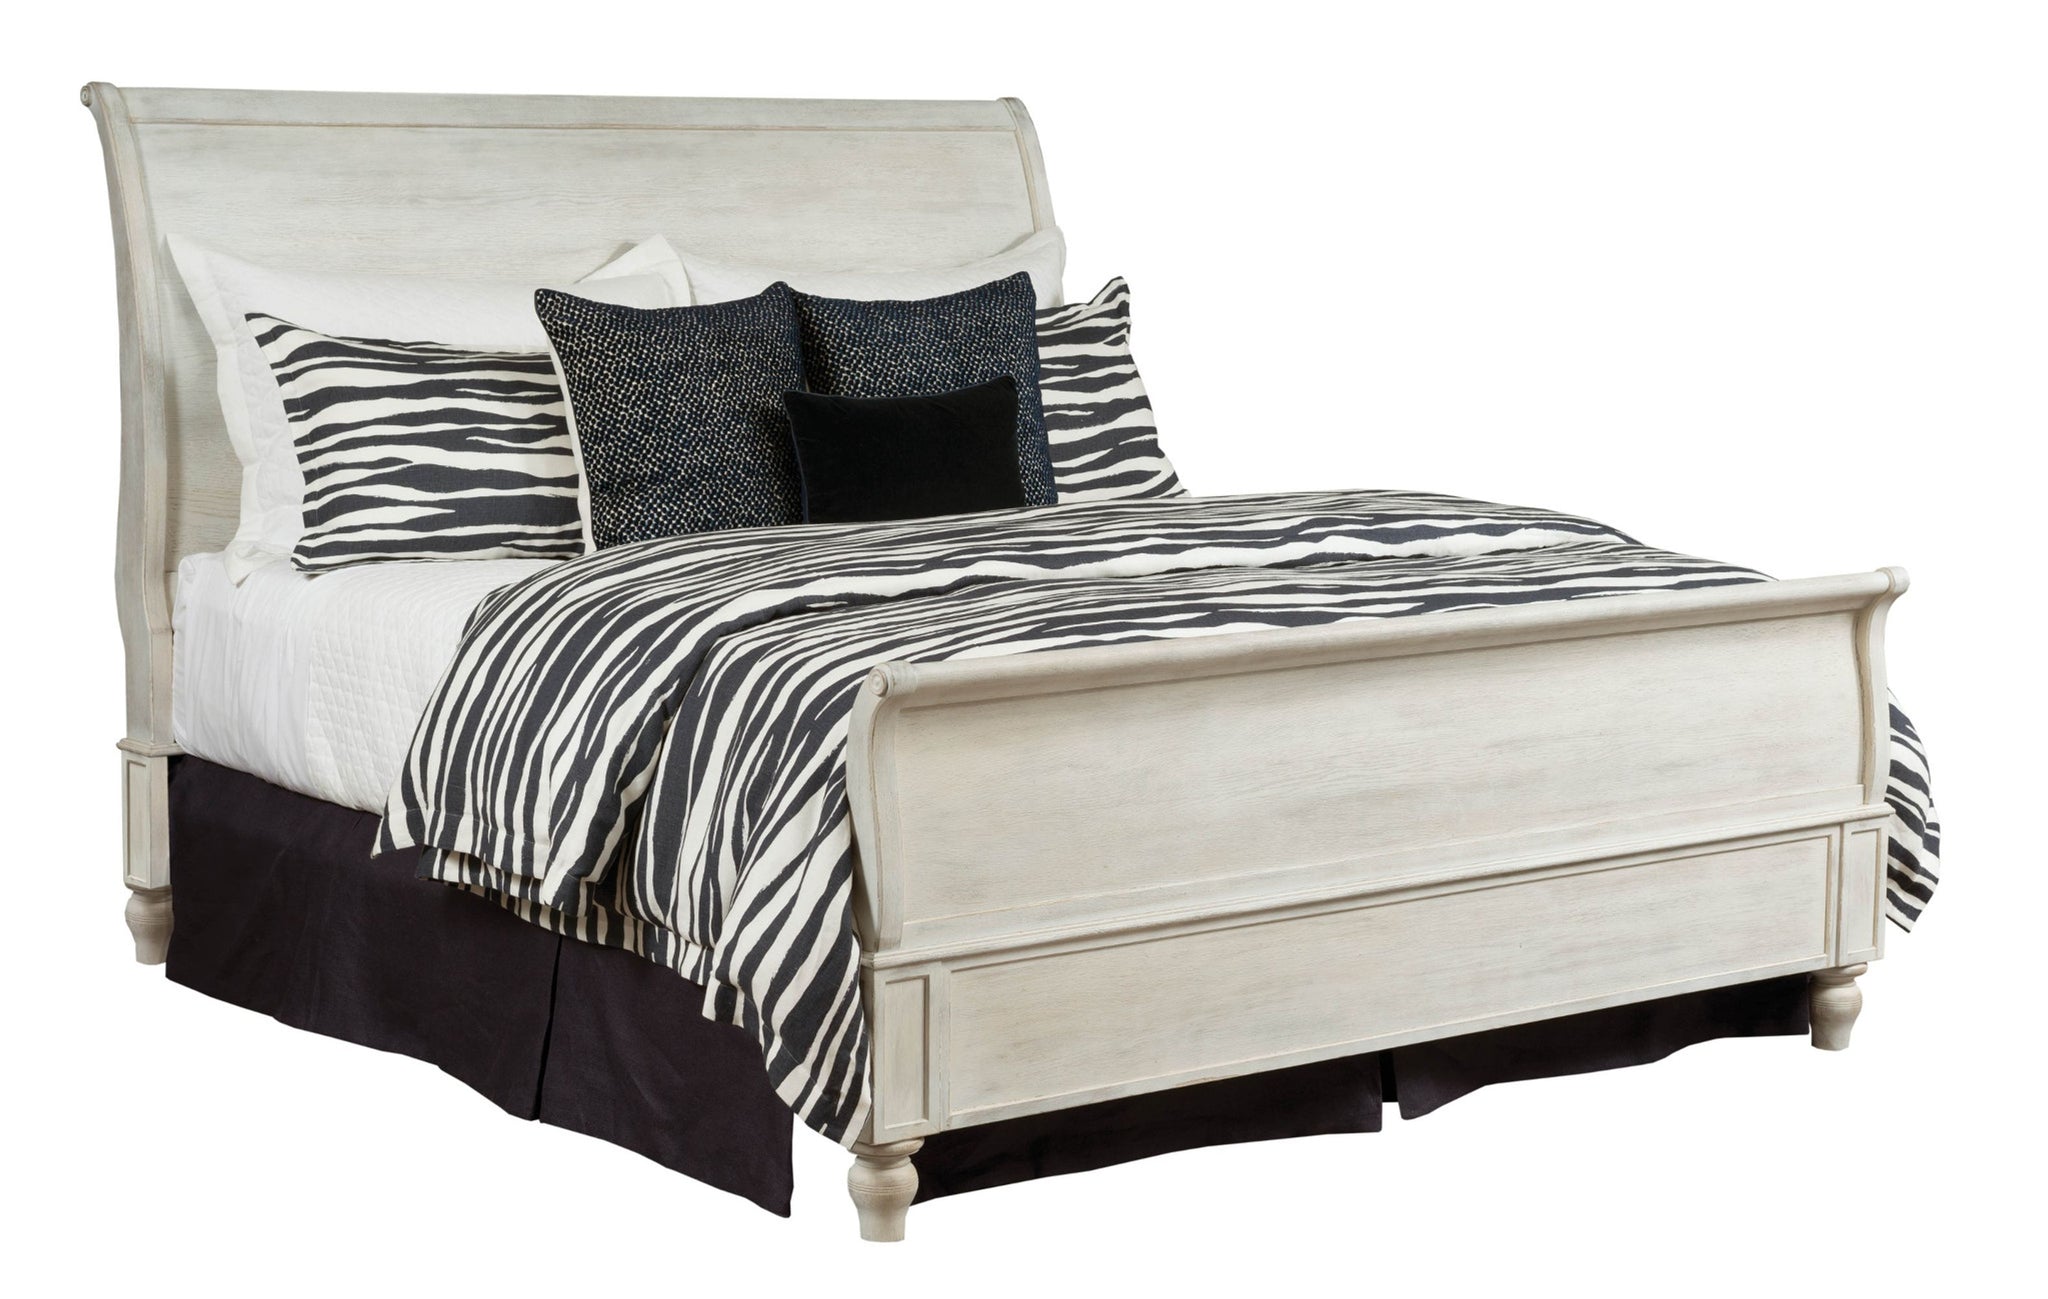 HANOVER SLEIGH CAL KING BED COMPLETE